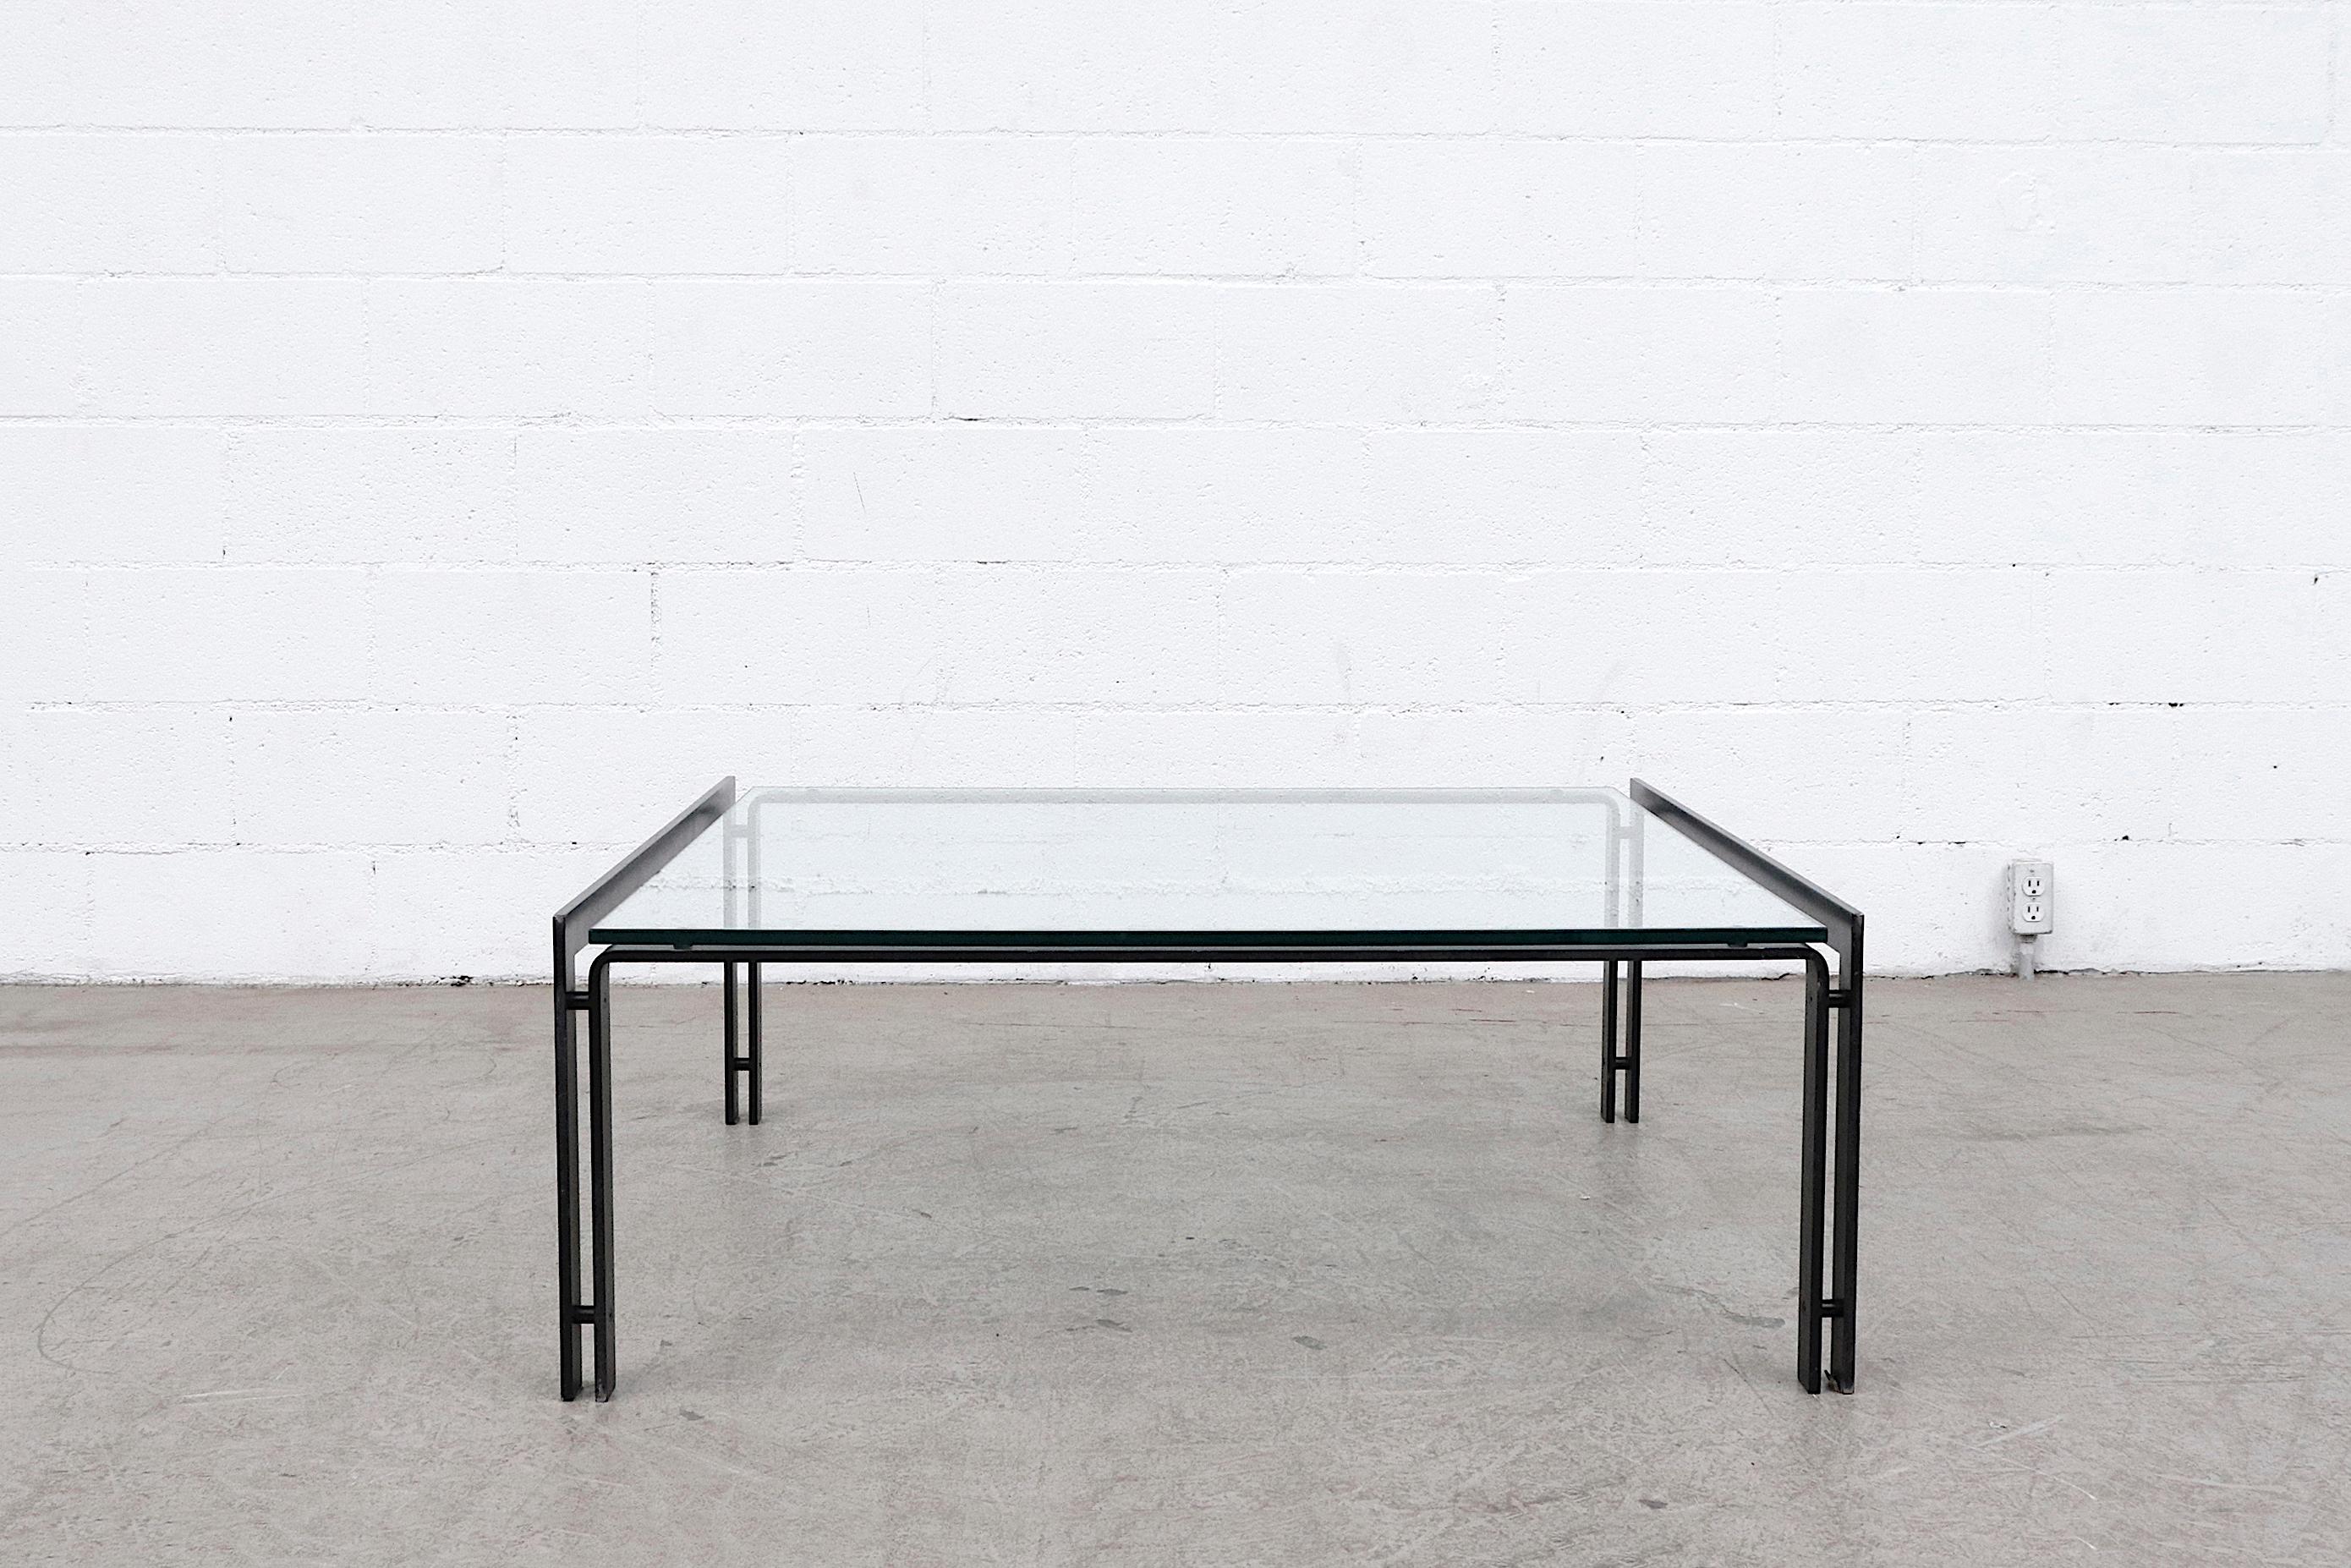 Large Metaform coffee table with double banded black enameled frame and heavy plate glass top. In original condition with some frame wear and scratches.